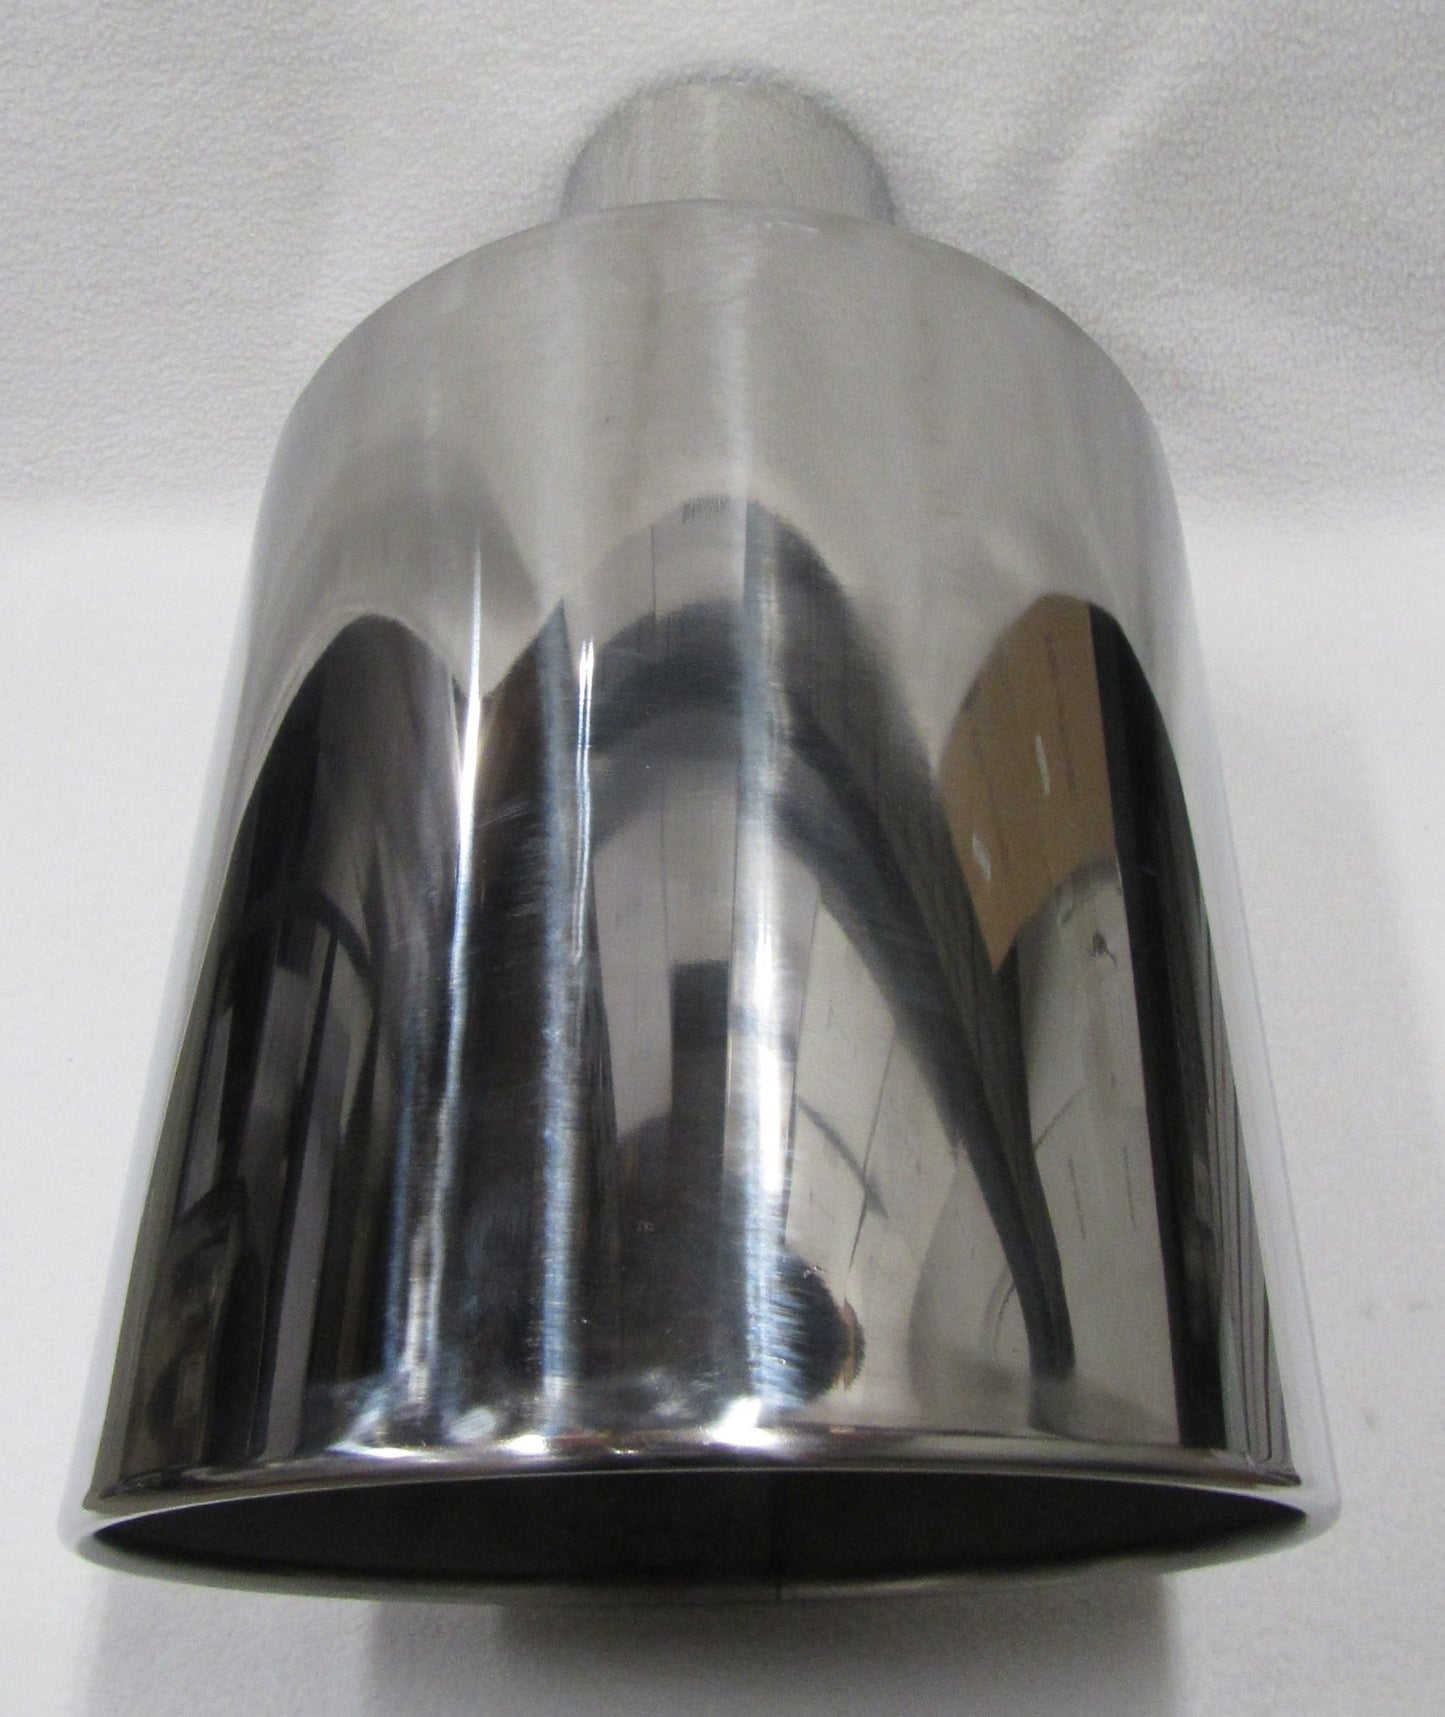 CHEVY DURAMAX 6.6L 5" IN x 10" OUT x 18" LONG POLISHED STAINLESS EXHAUST TIP